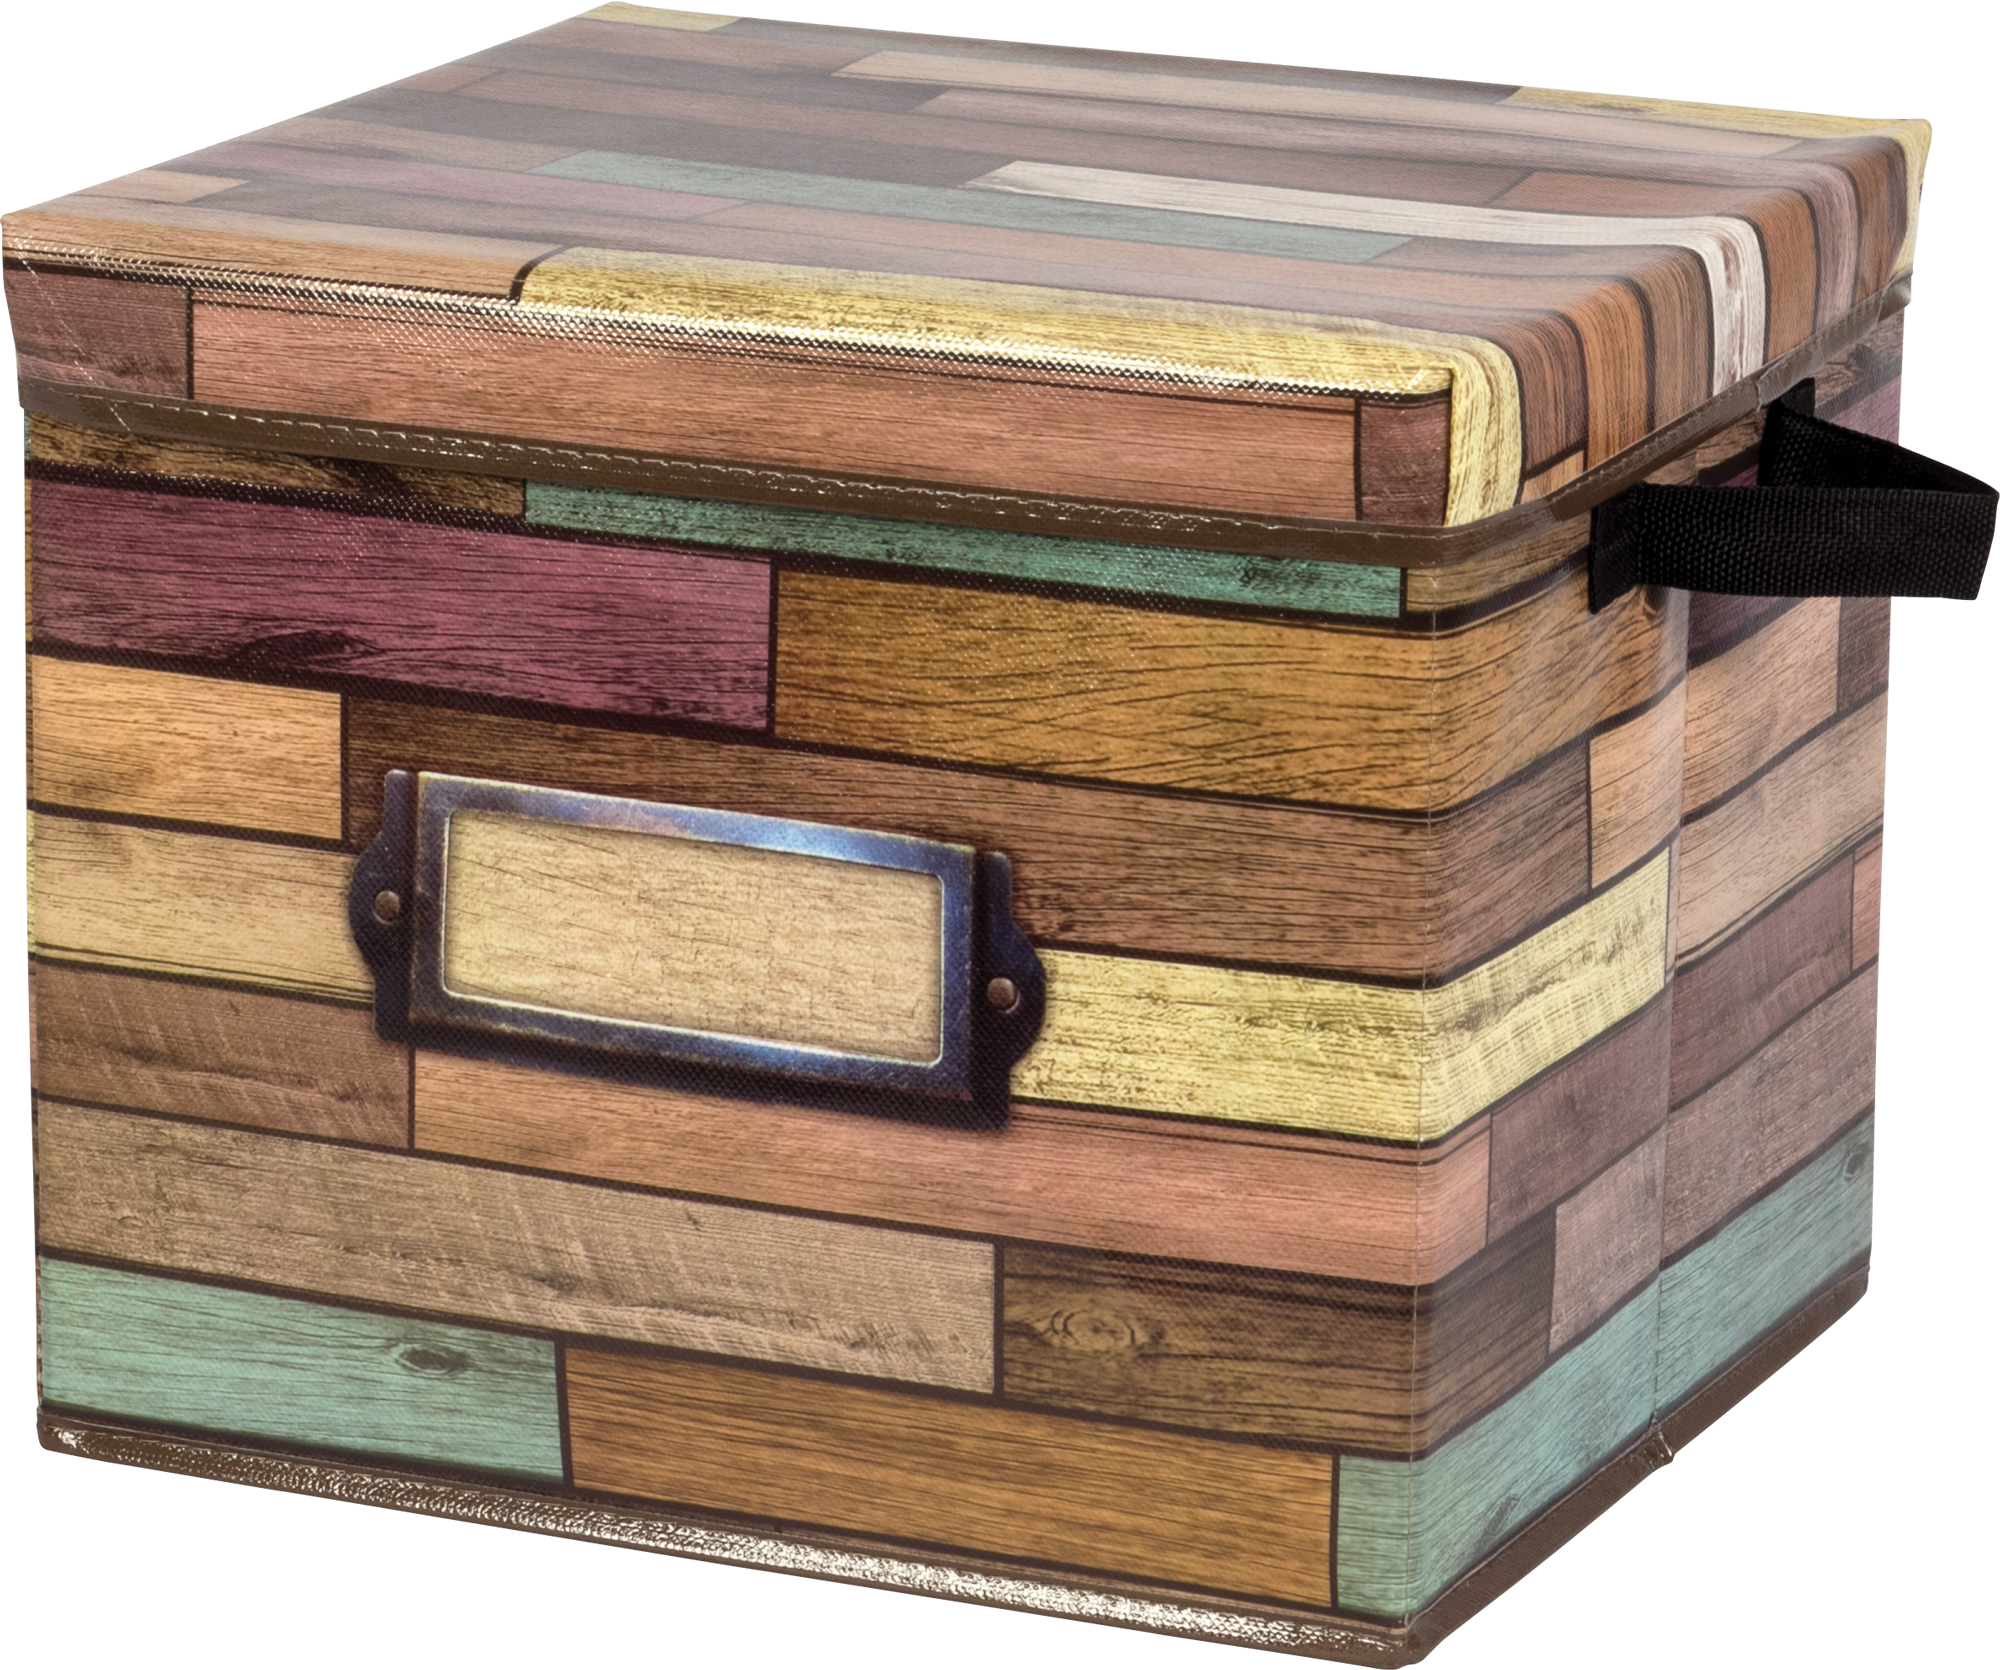 Reclaimed Wood Storage Box - TCR20915 | Teacher Created Resources